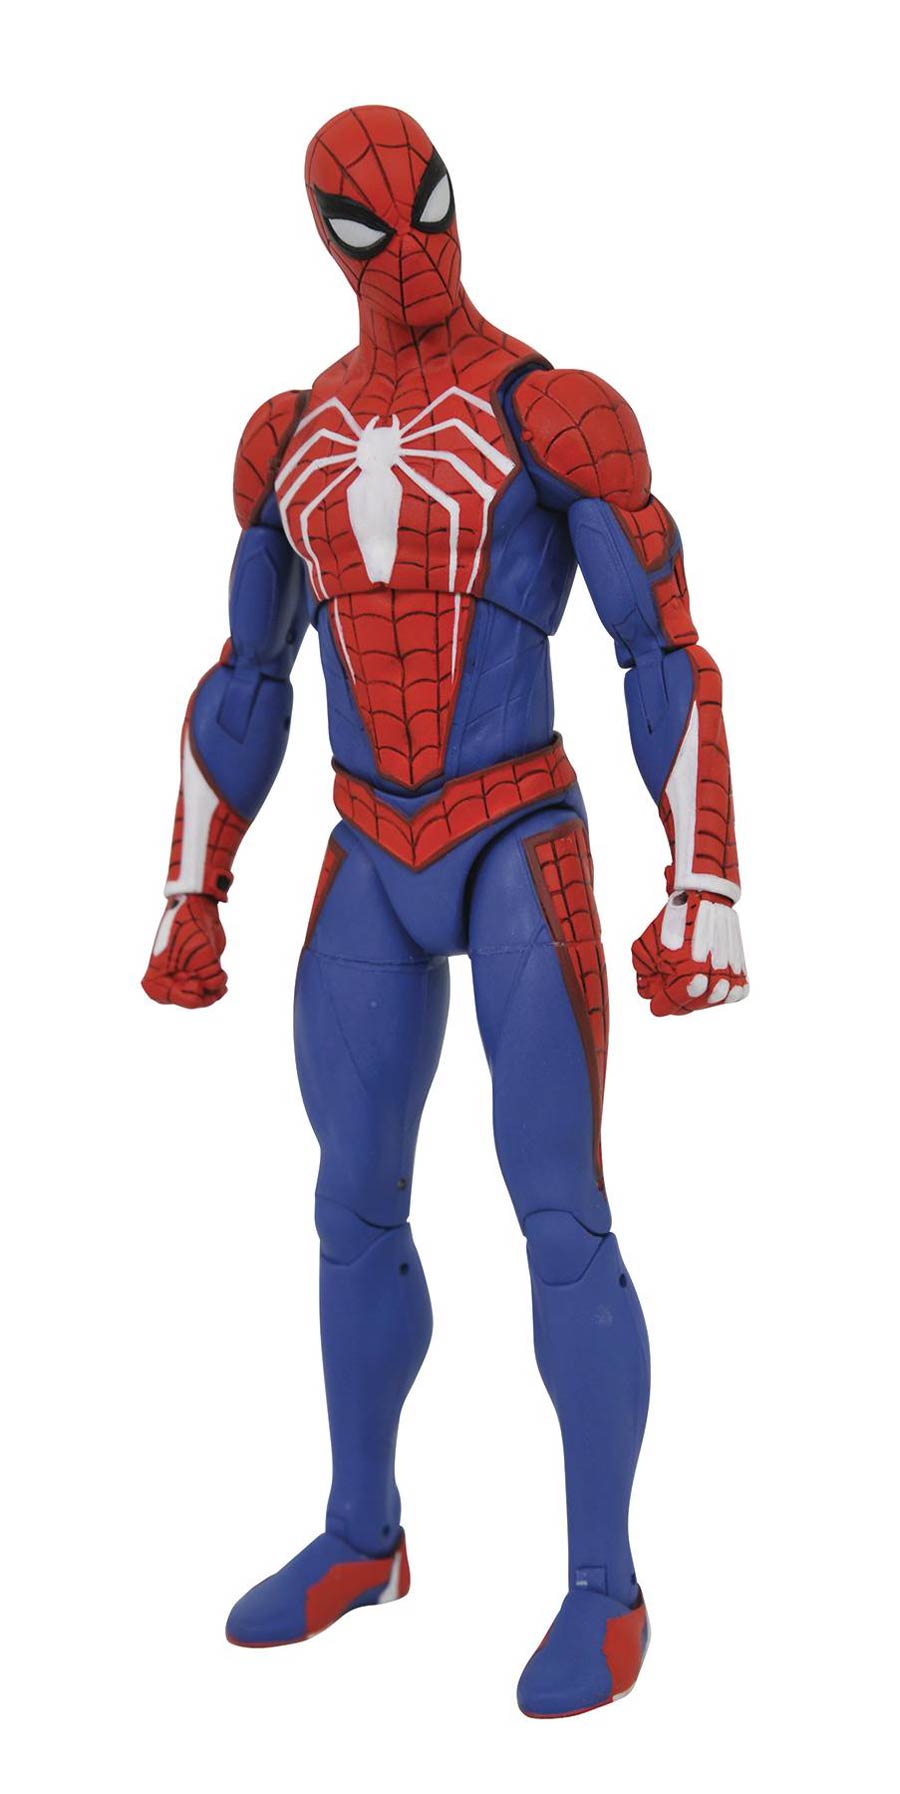 Marvel Select Spider-Man PS4 Video Game Action Figure